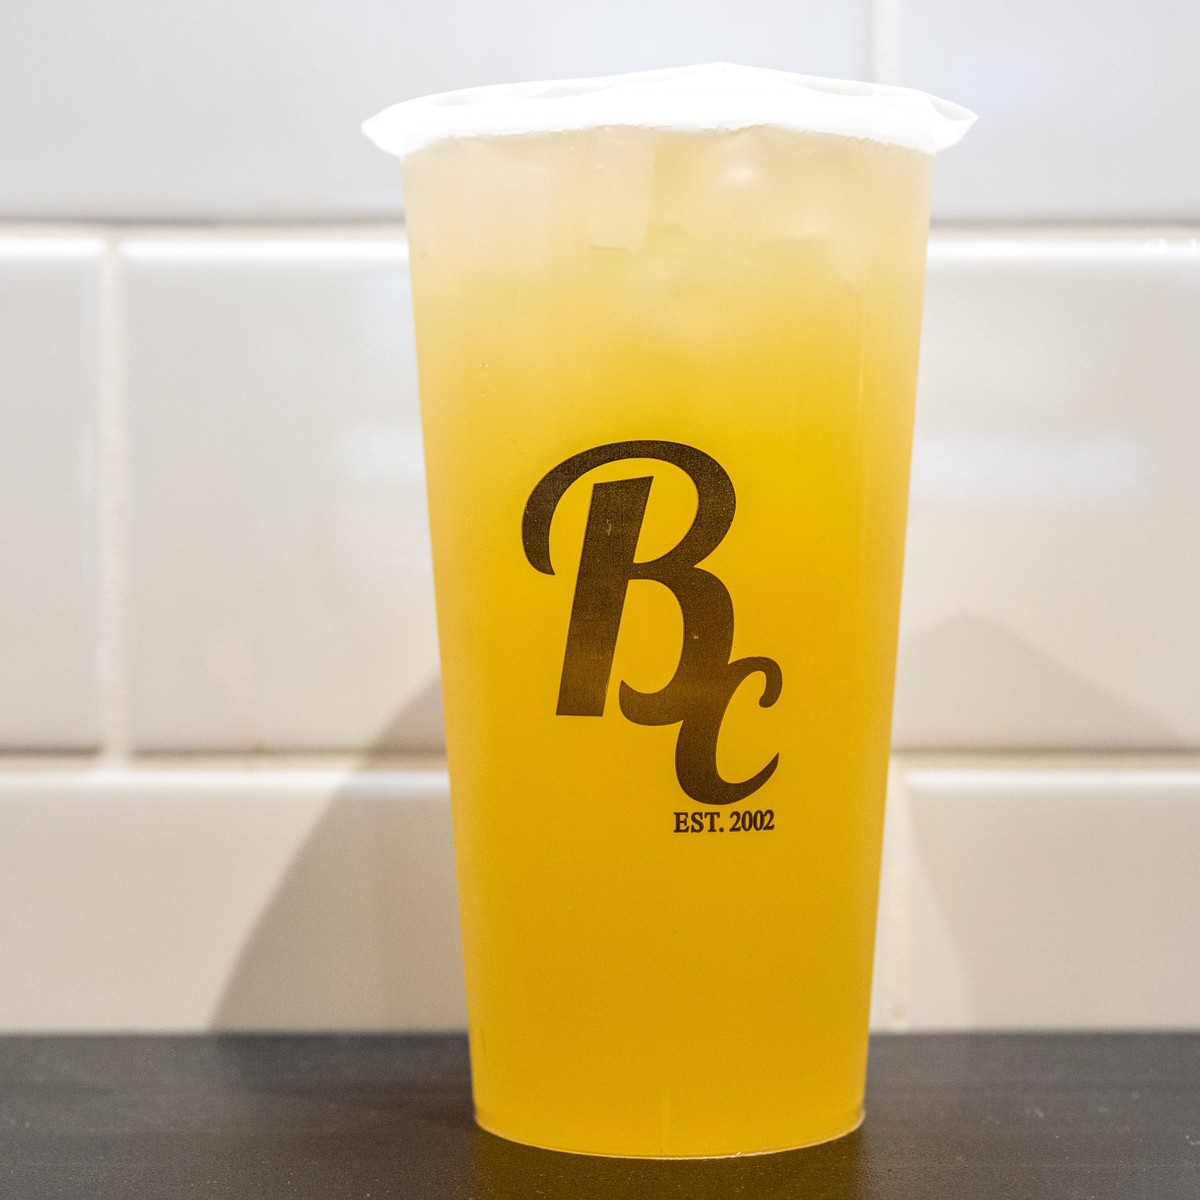 Bubble Cup (Chadstone) Restaurant Menu - Takeout in Melbourne, Delivery  Menu & Prices